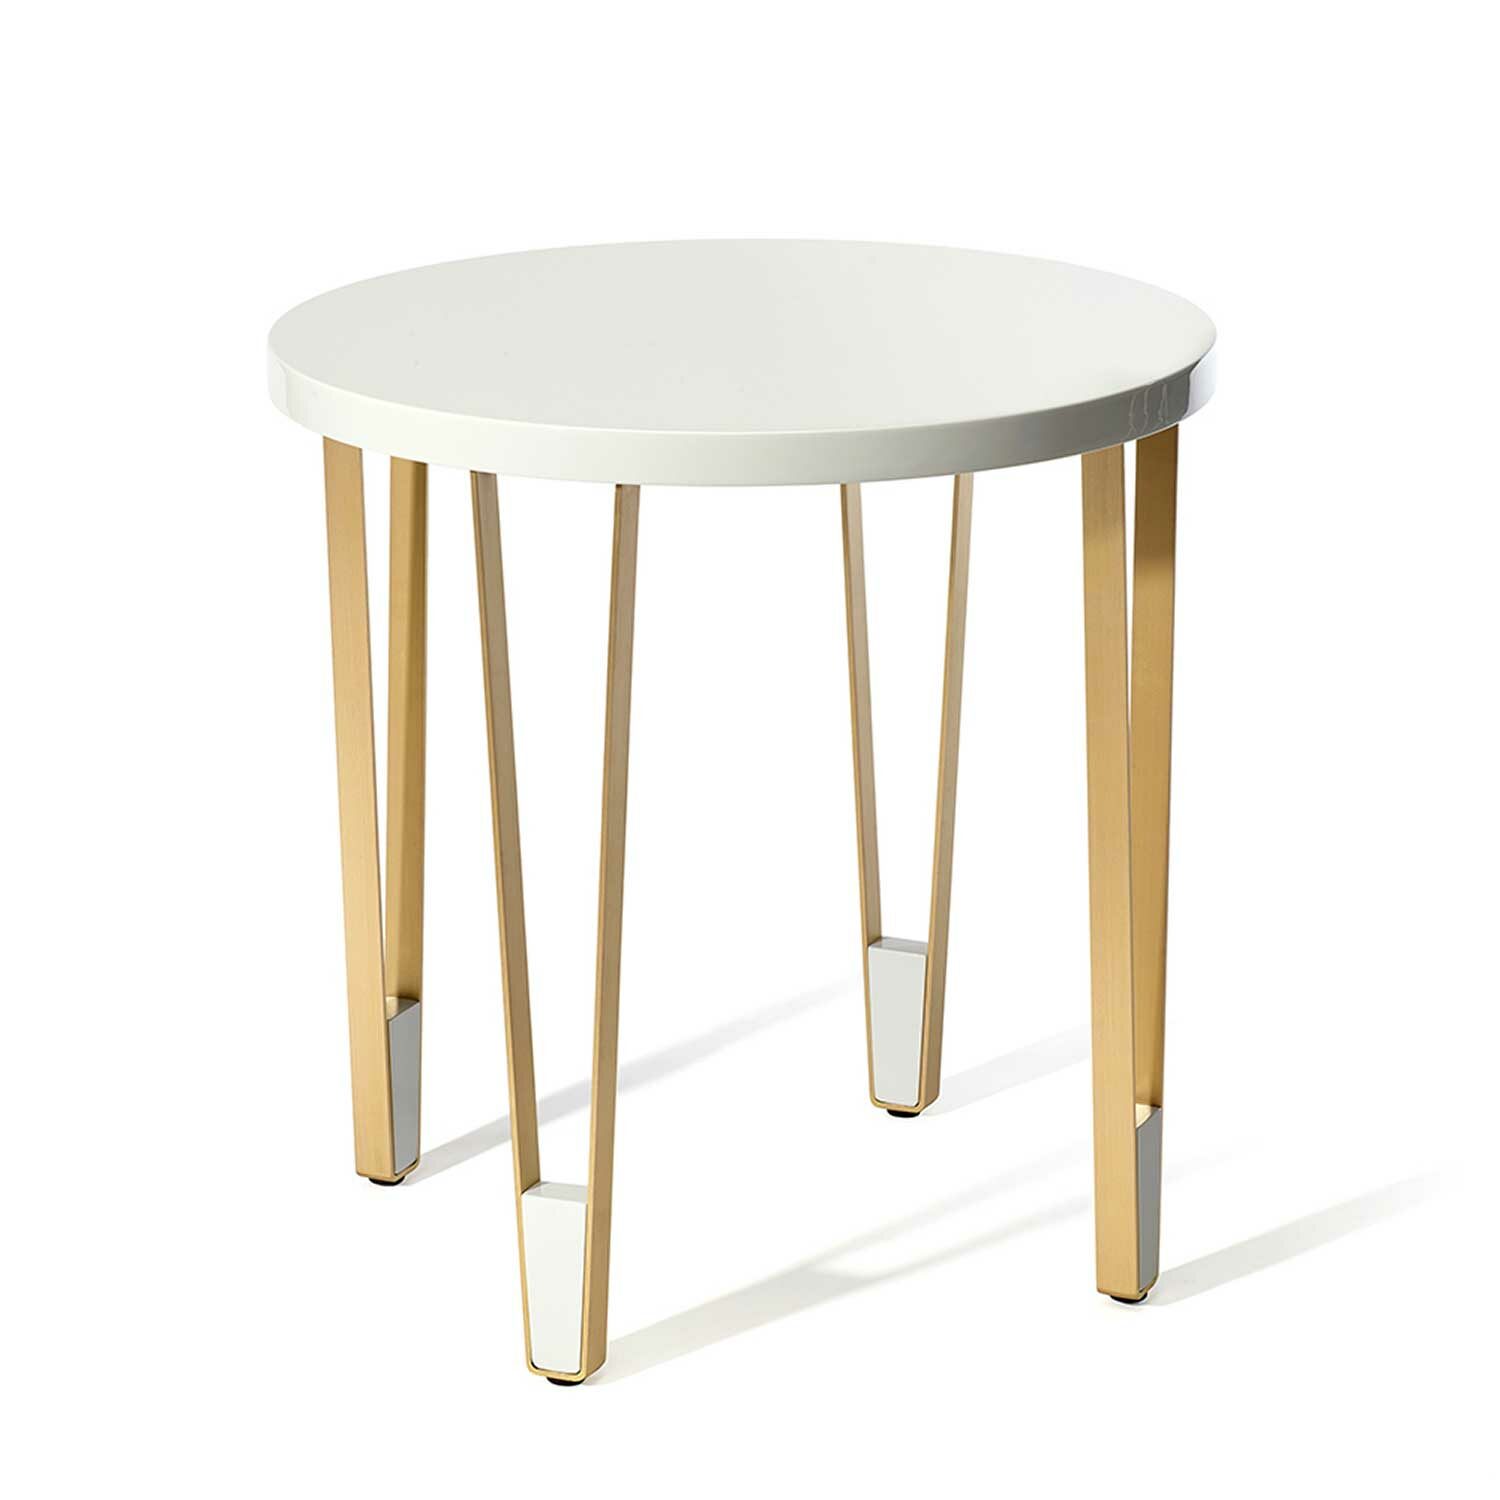 IONIC side table round